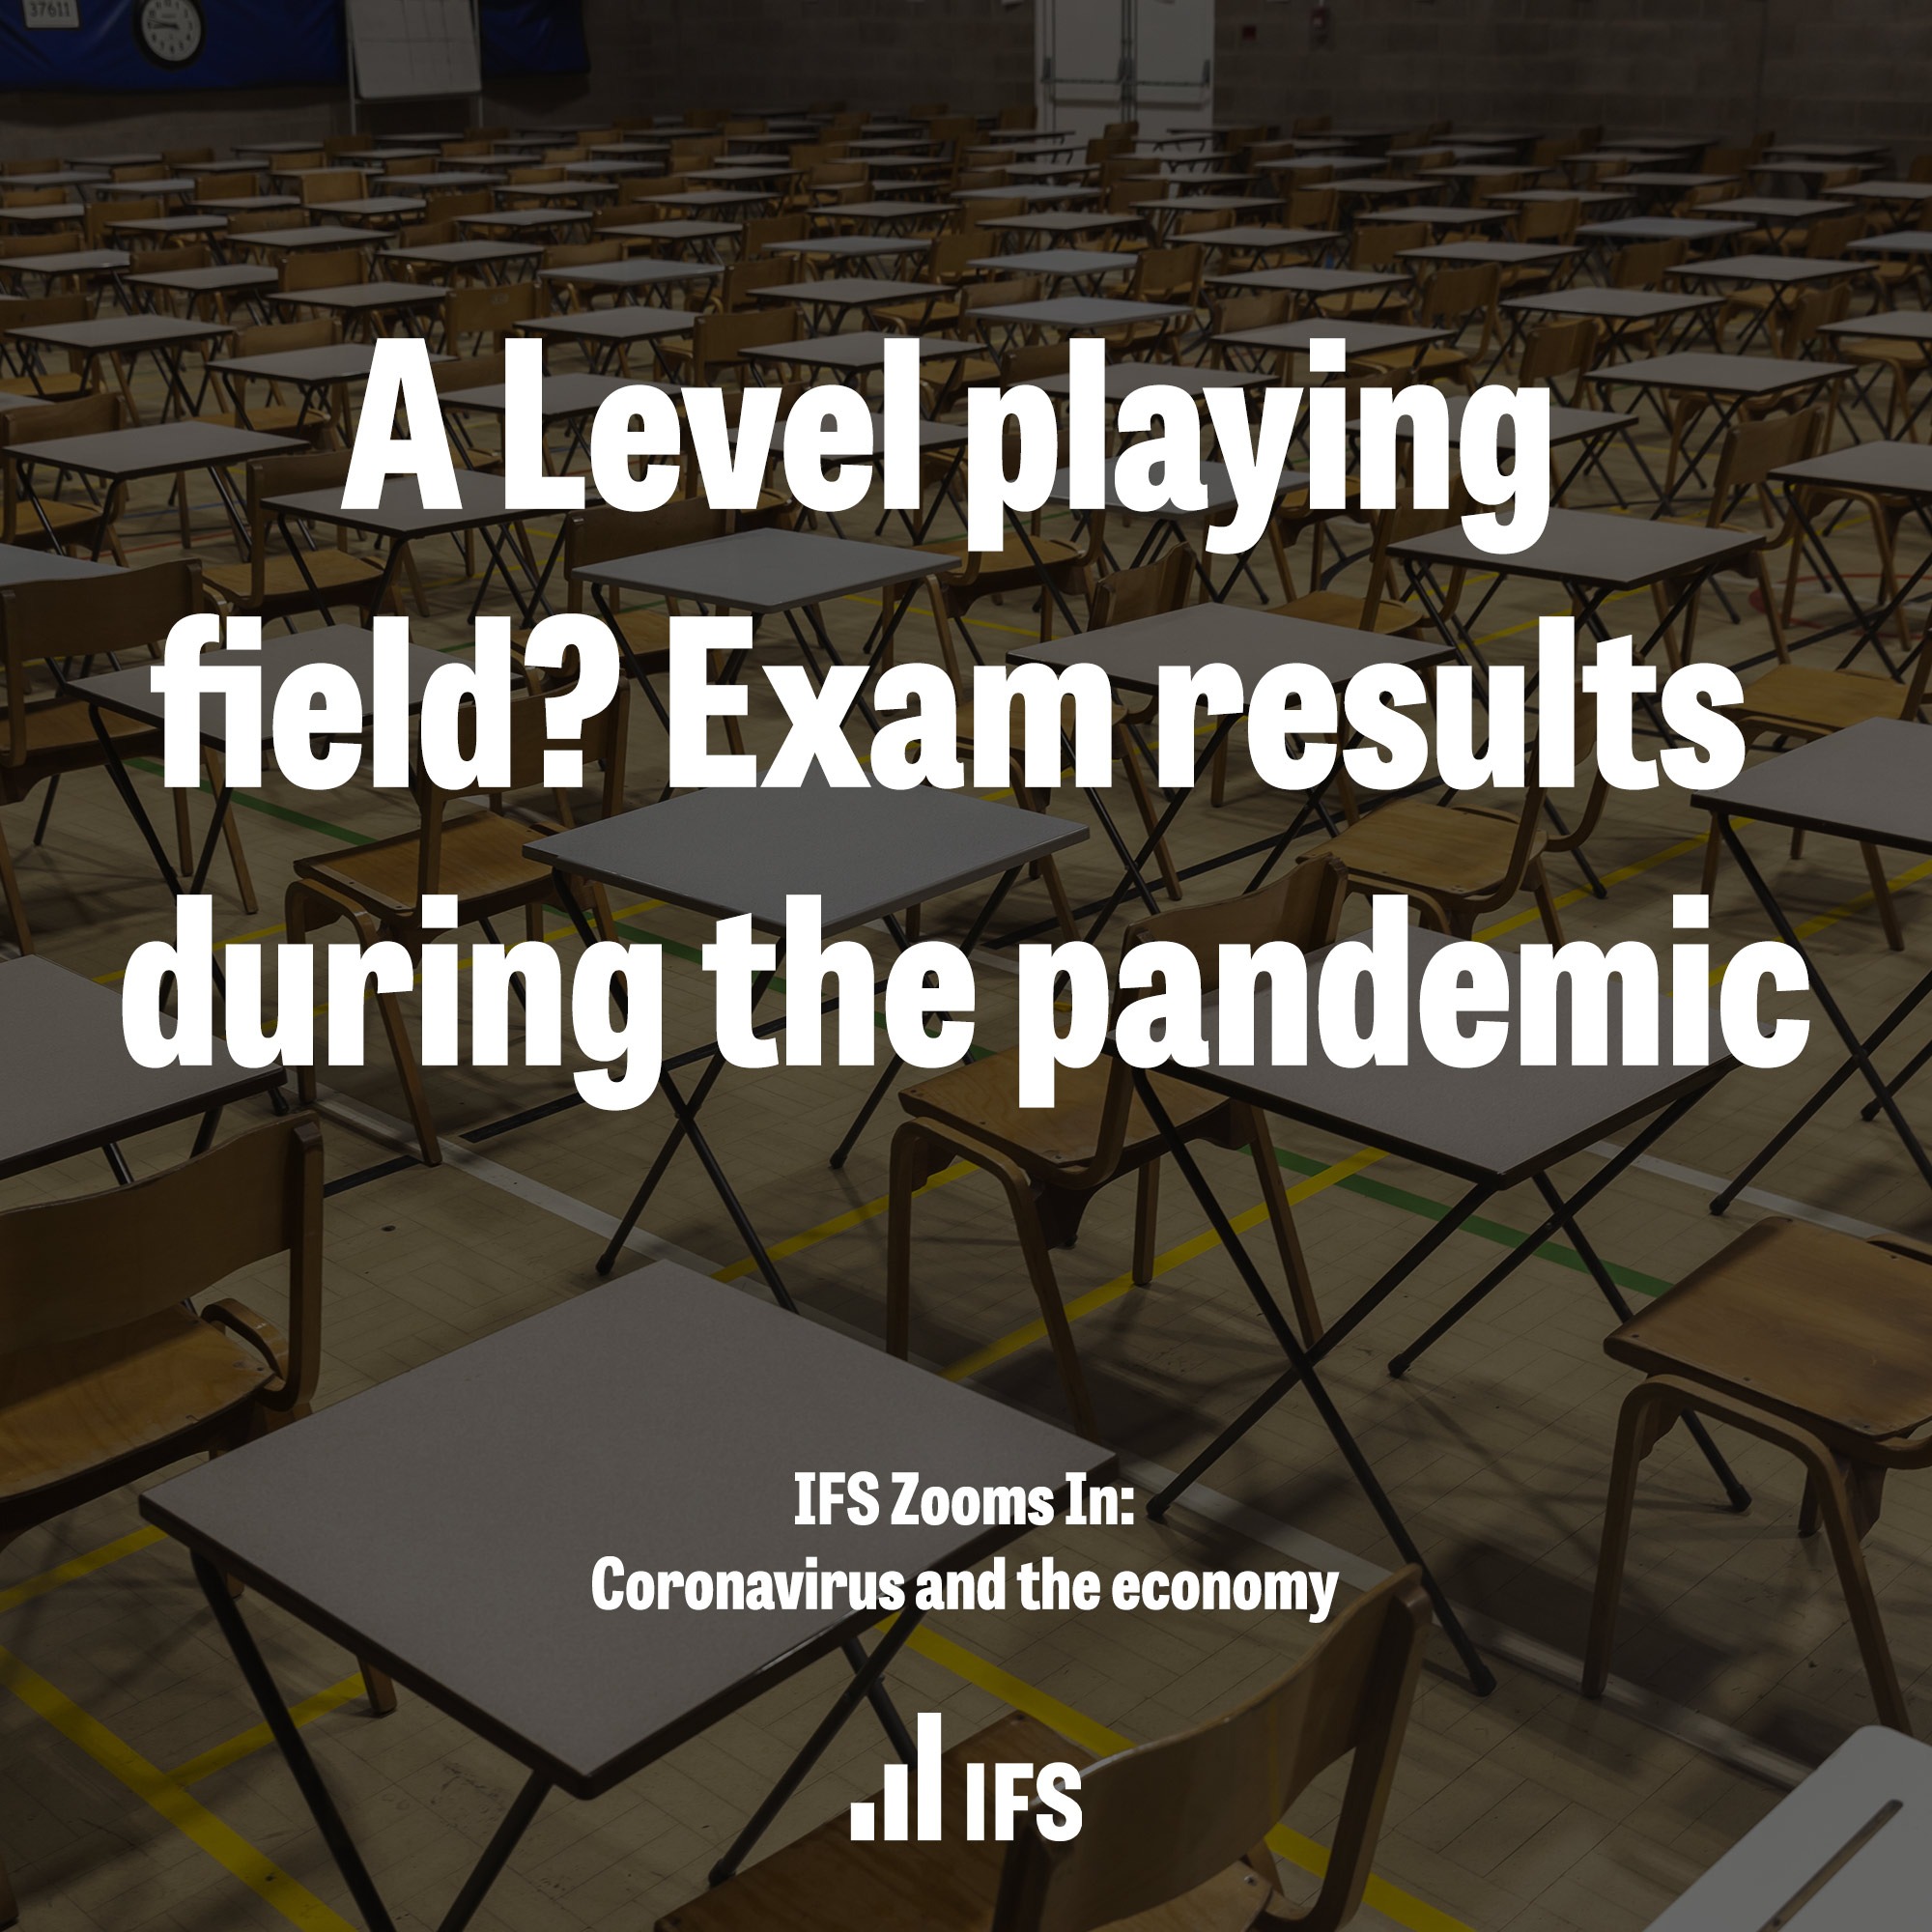 A Level playing field? Exam results during the pandemic